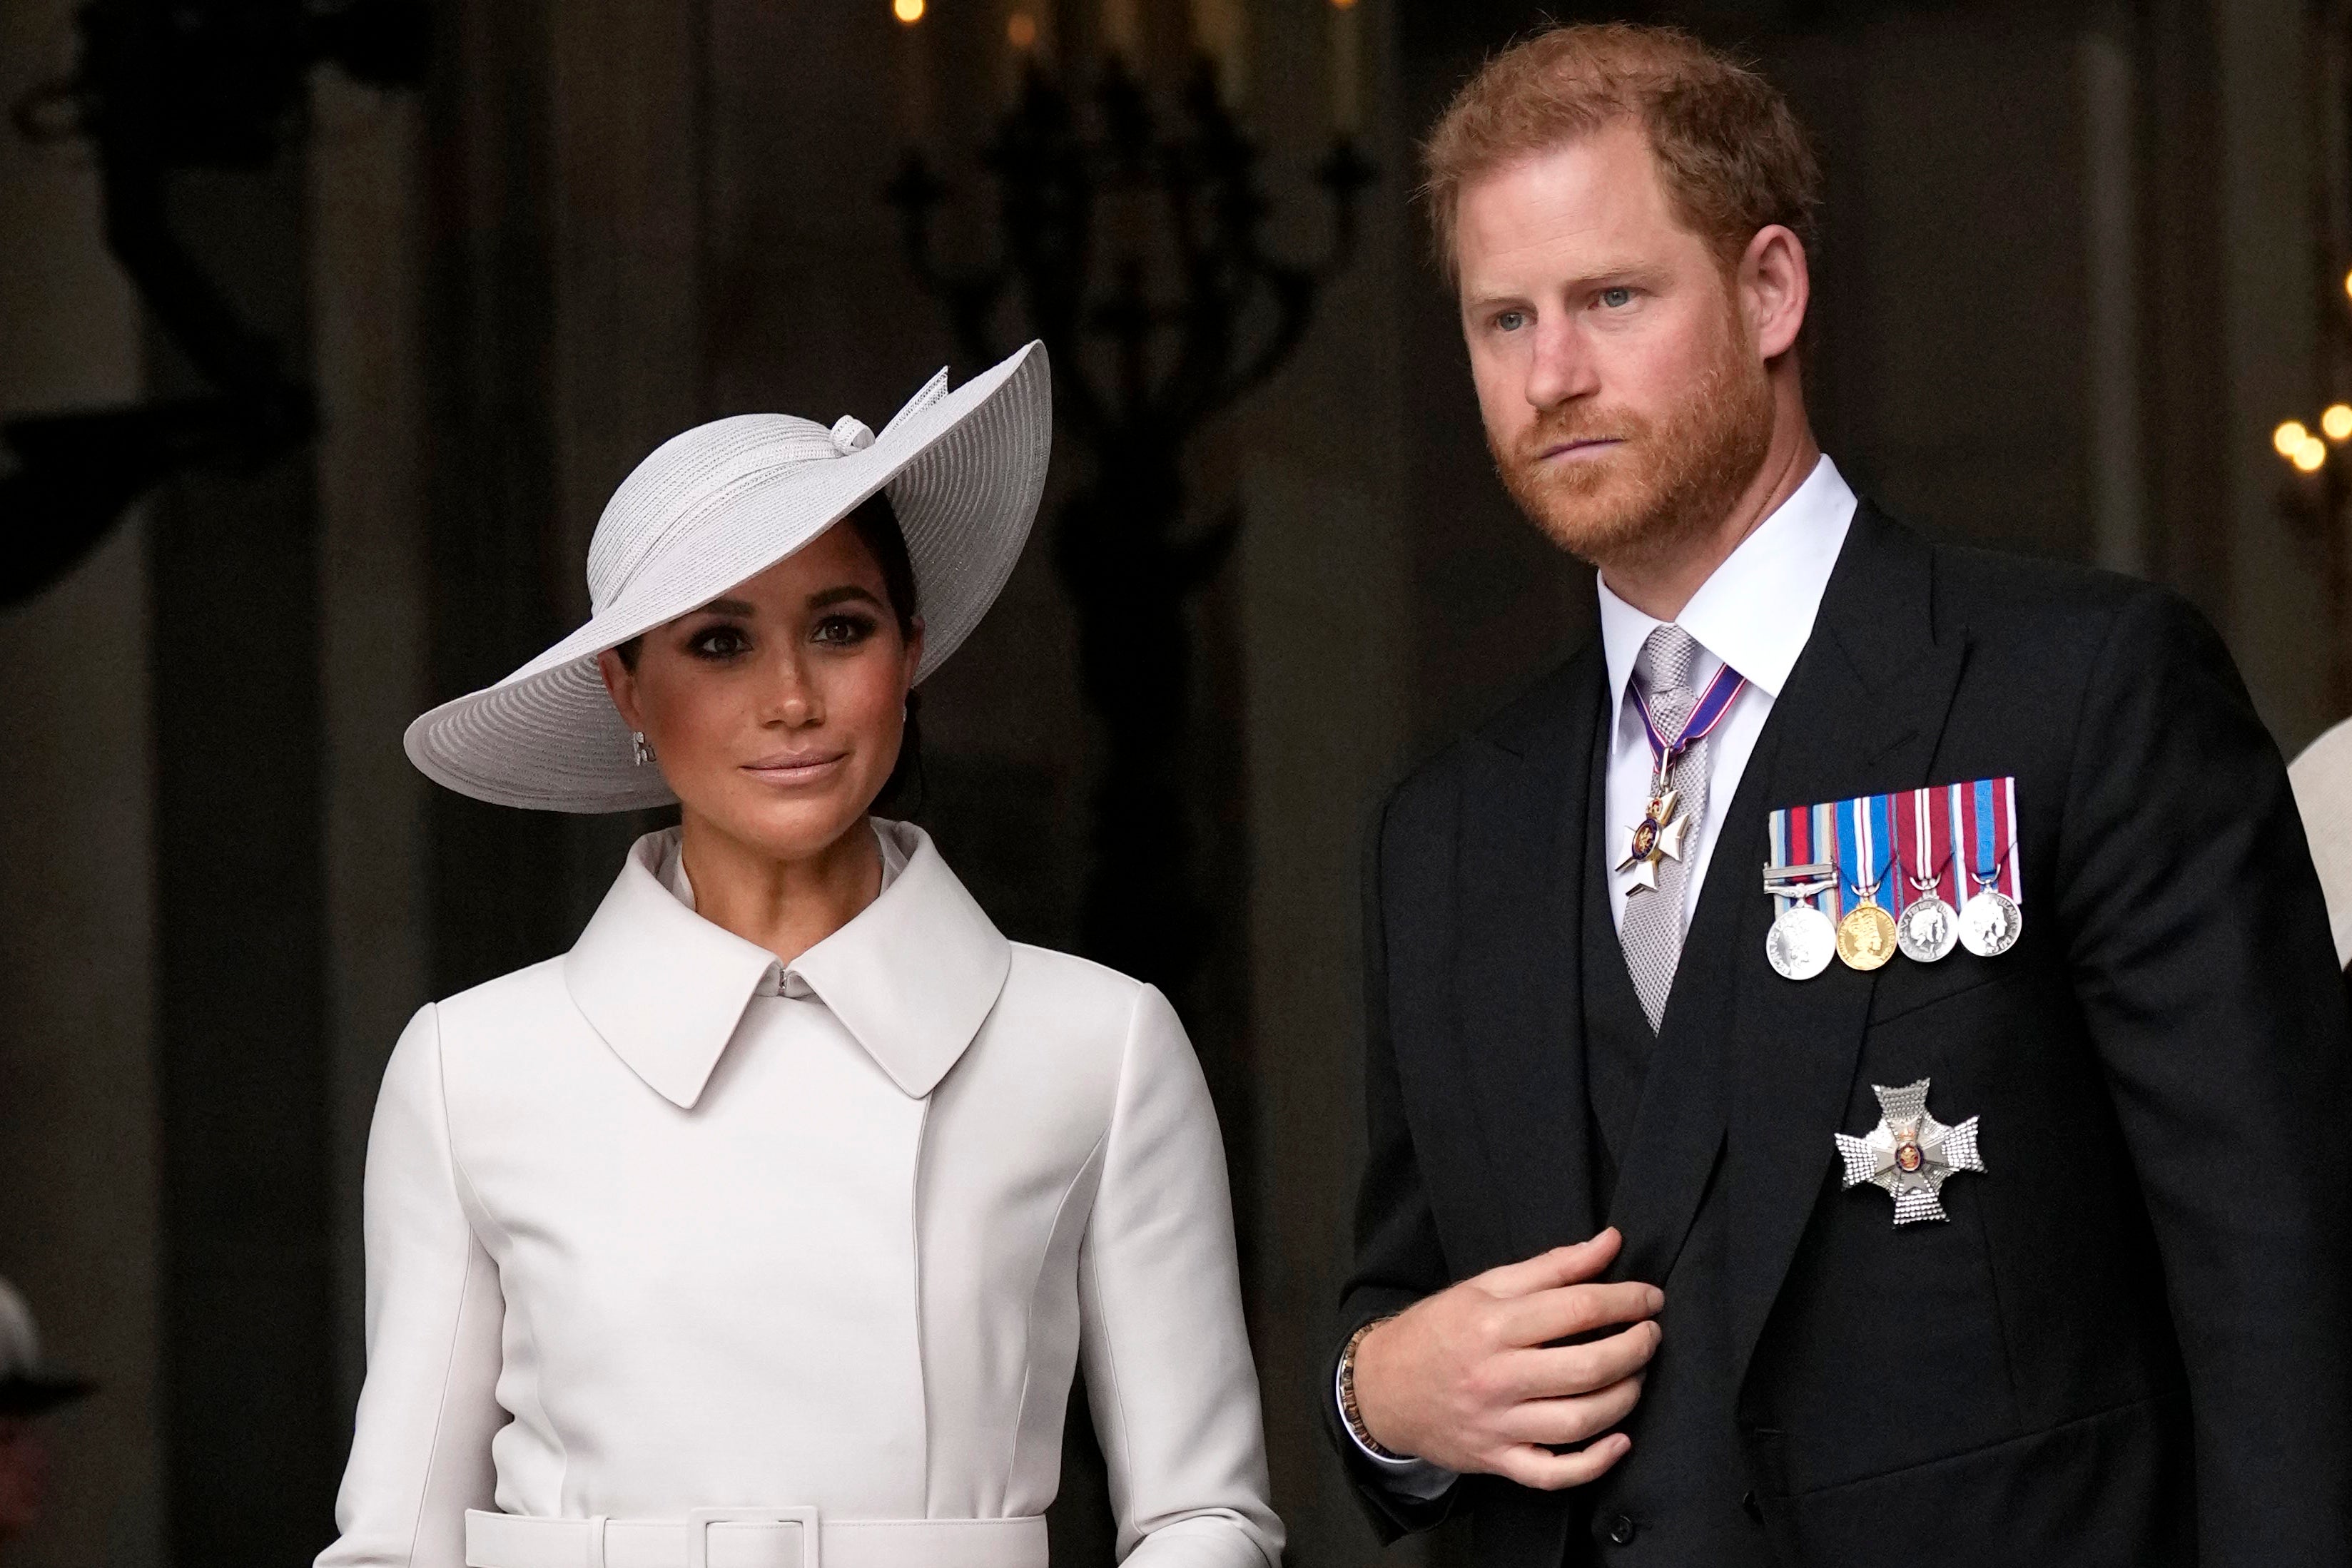 Harry and Meghan reportedly threatened legal action against the BBC after they reported a palace source saying that the Queen was not asked about the name